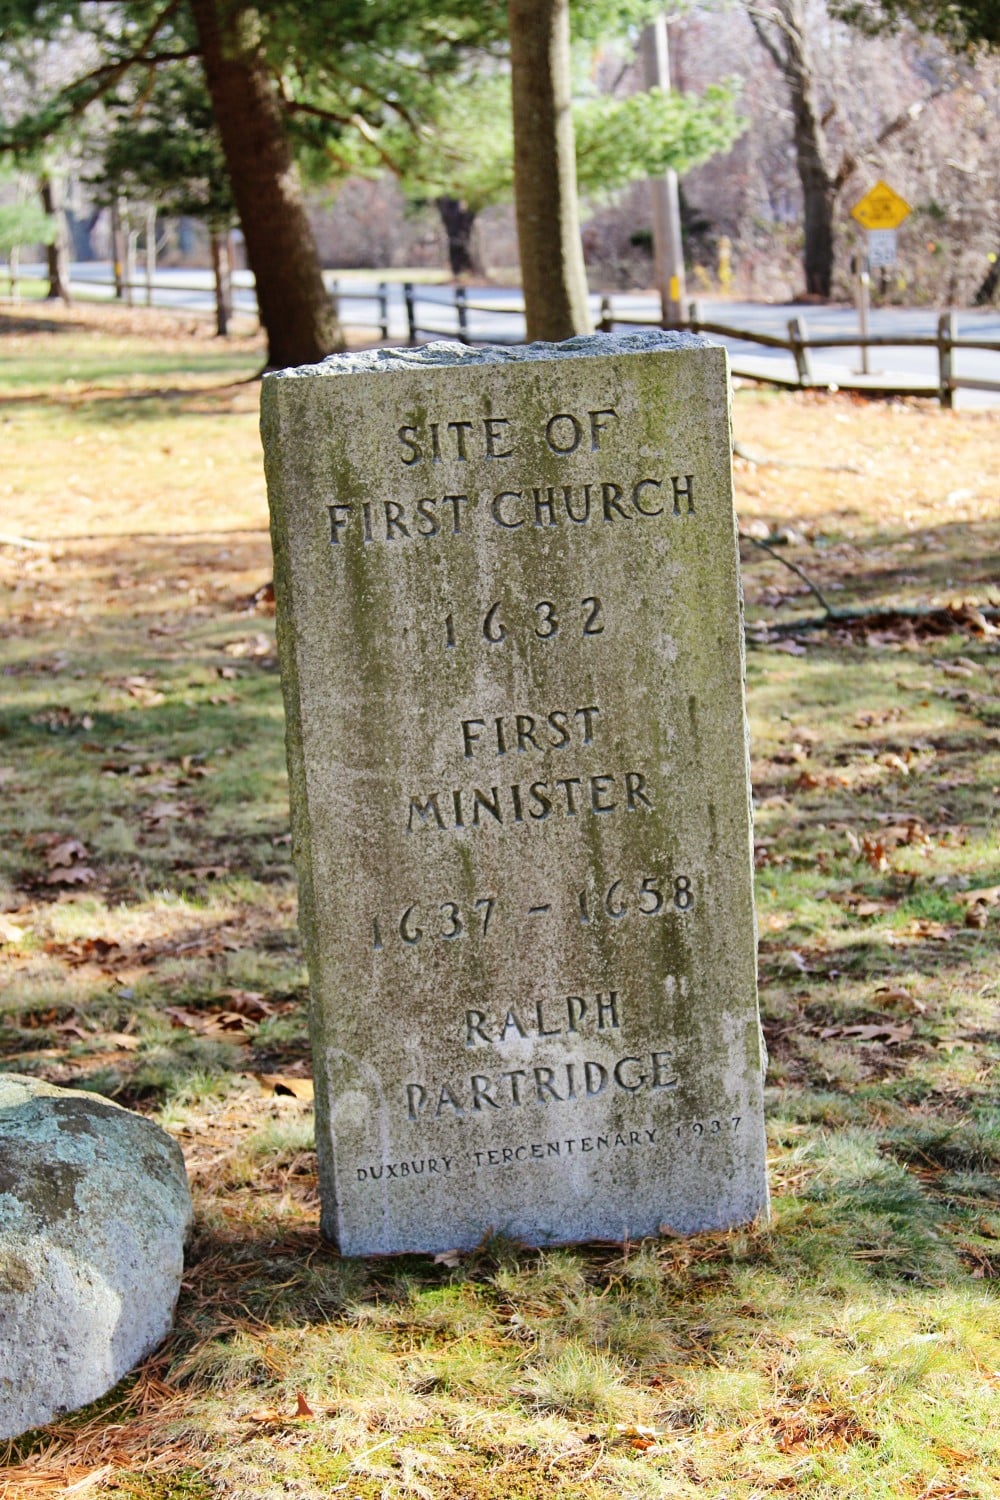 dc &#8211; site of first church